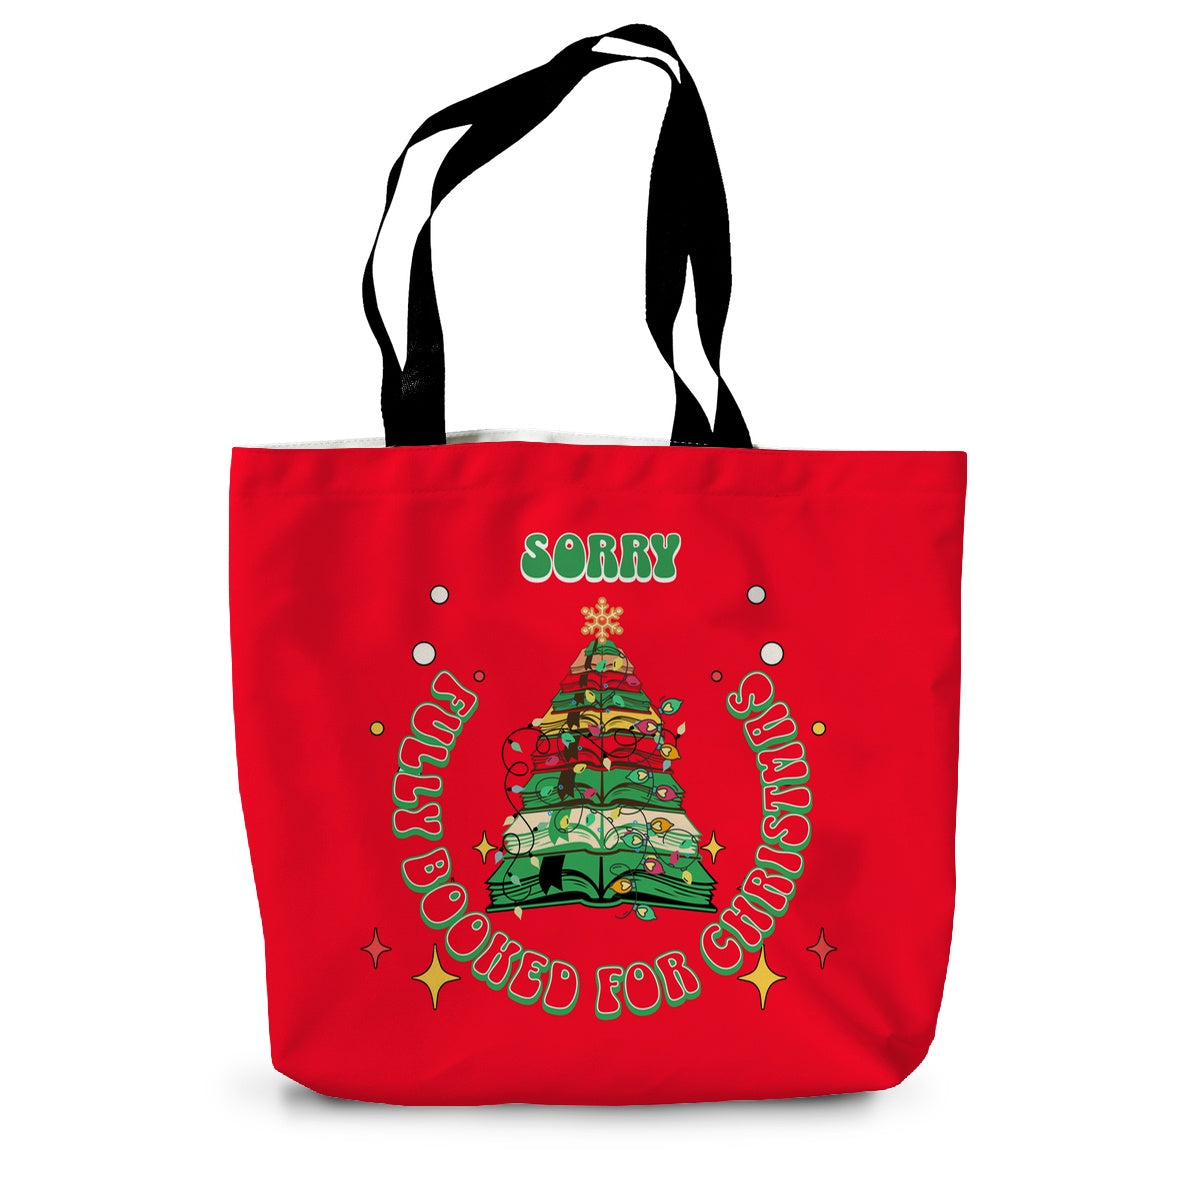 Sorry Fully Booked for Christmas Canvas Tote Bag